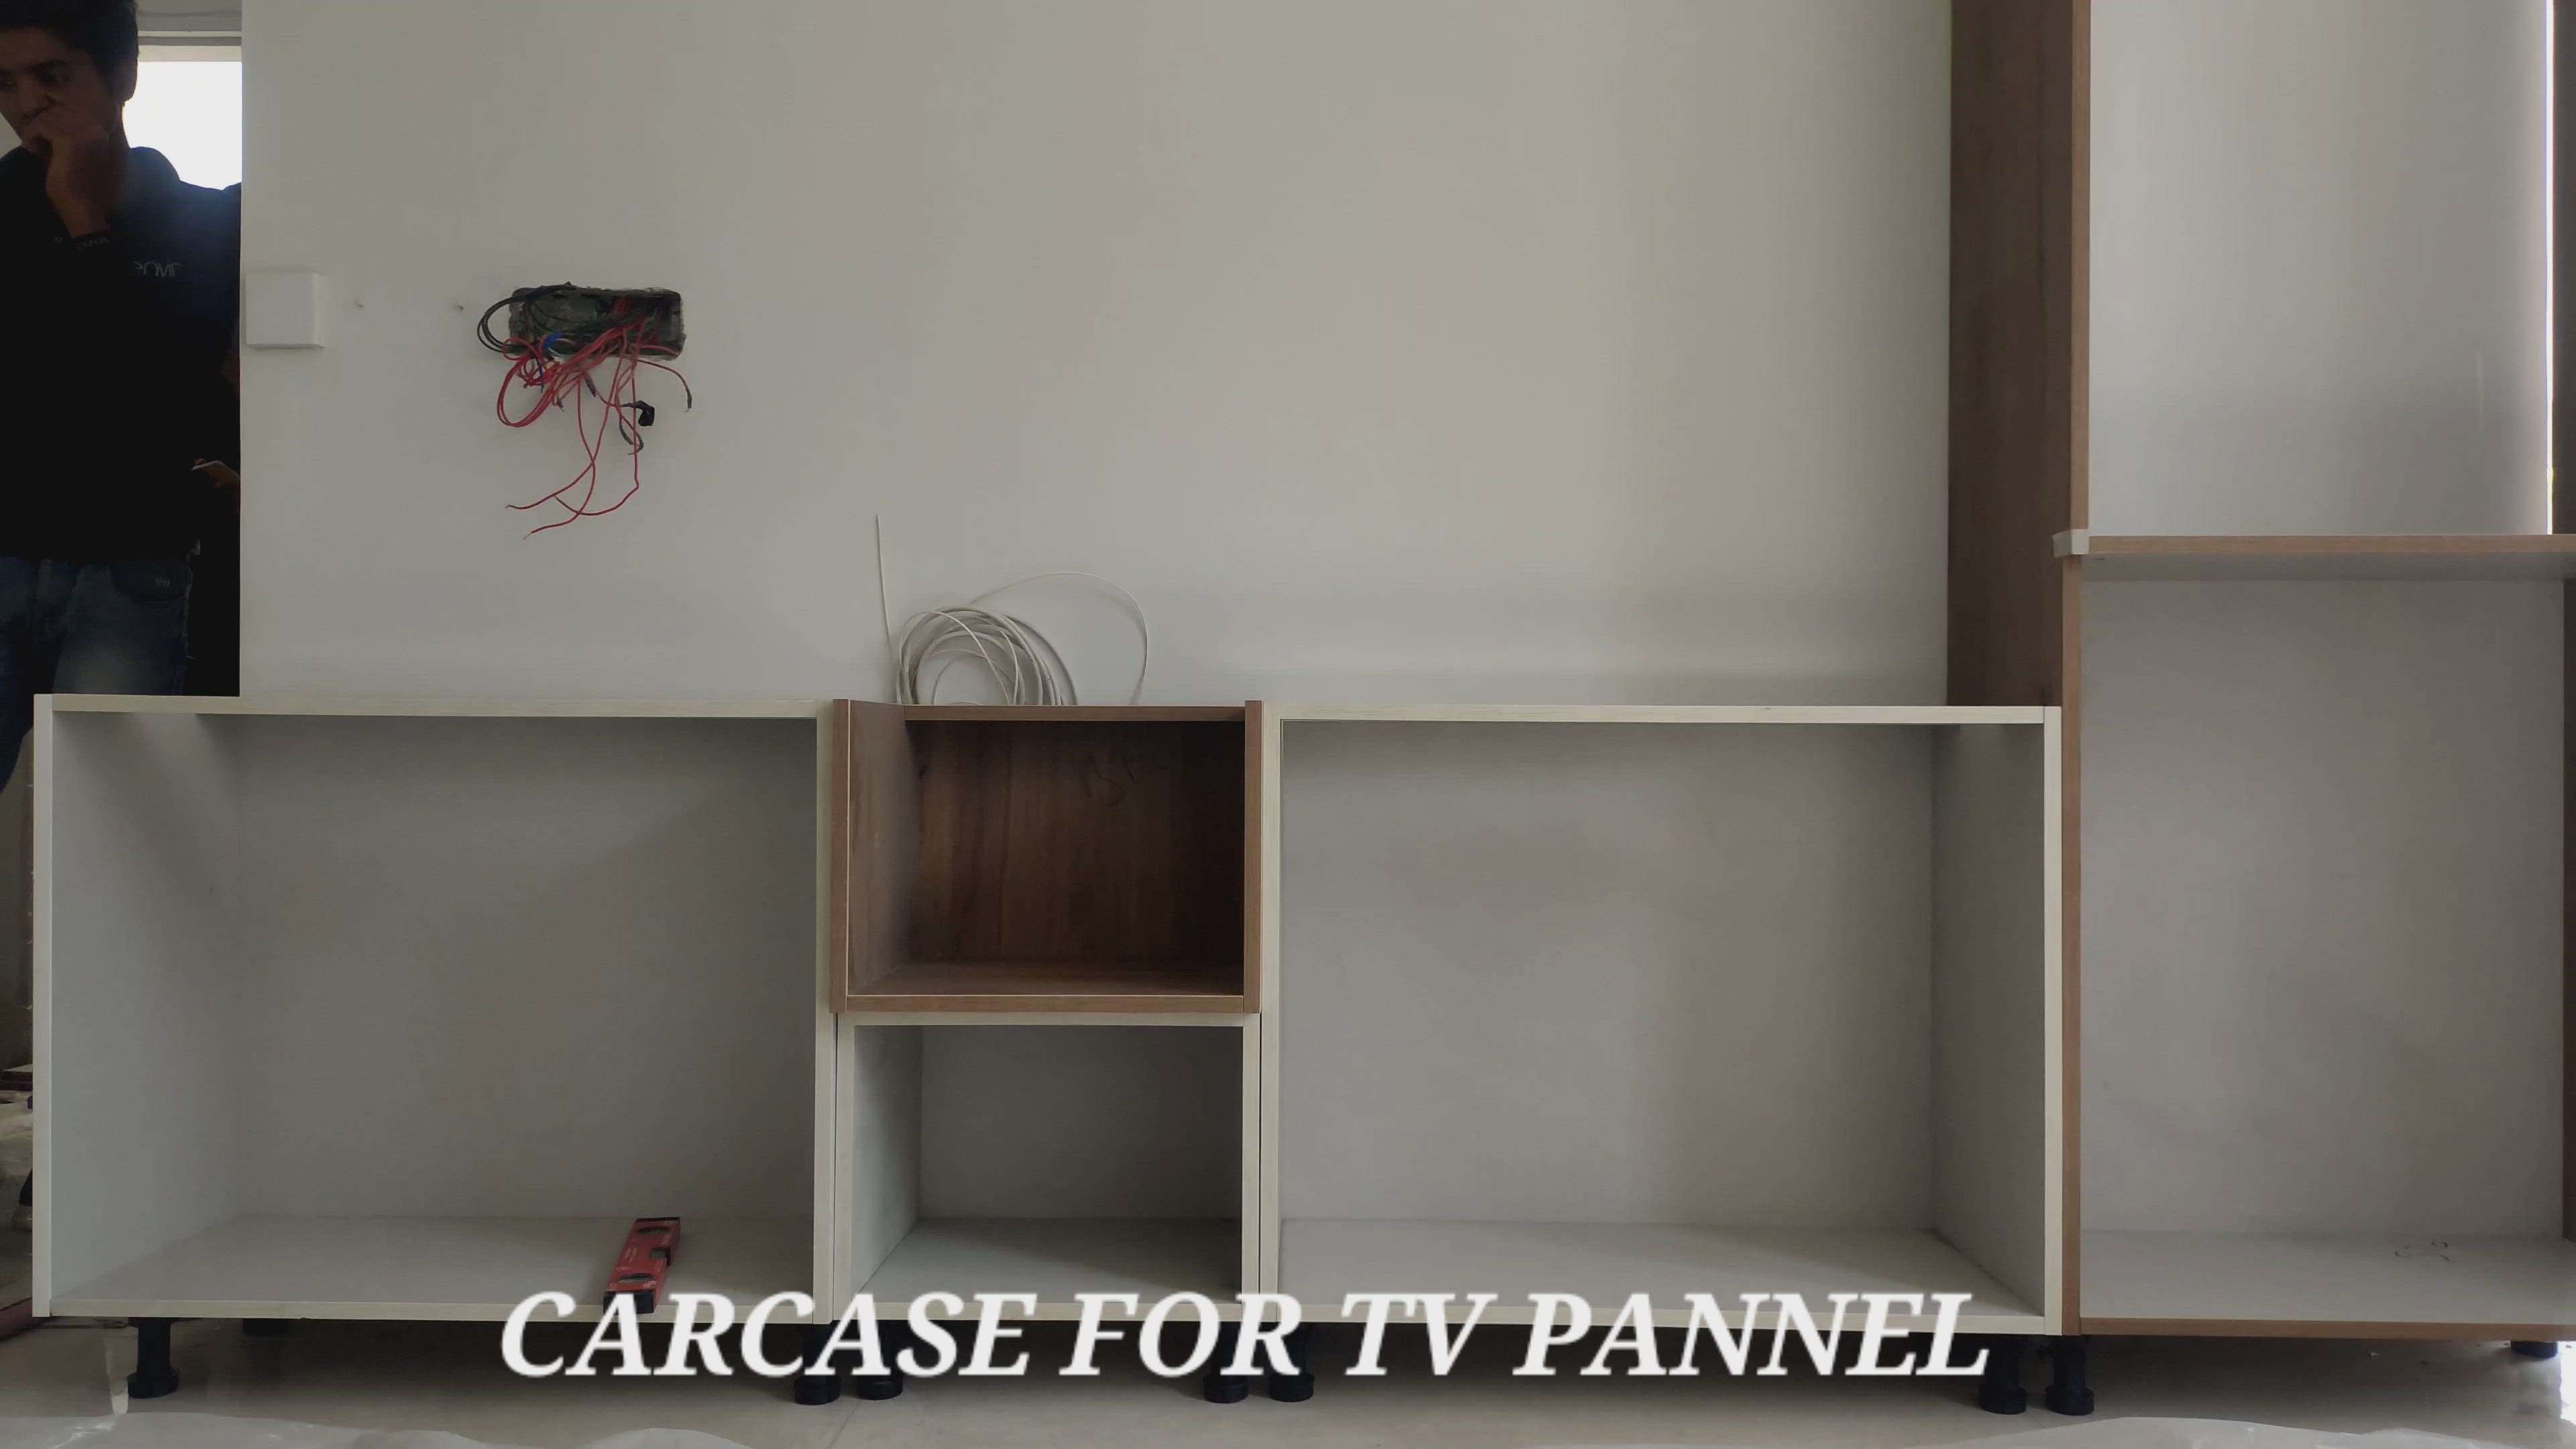 MODULAR TV PANNEL, INSTOLED IN SECTOR 85